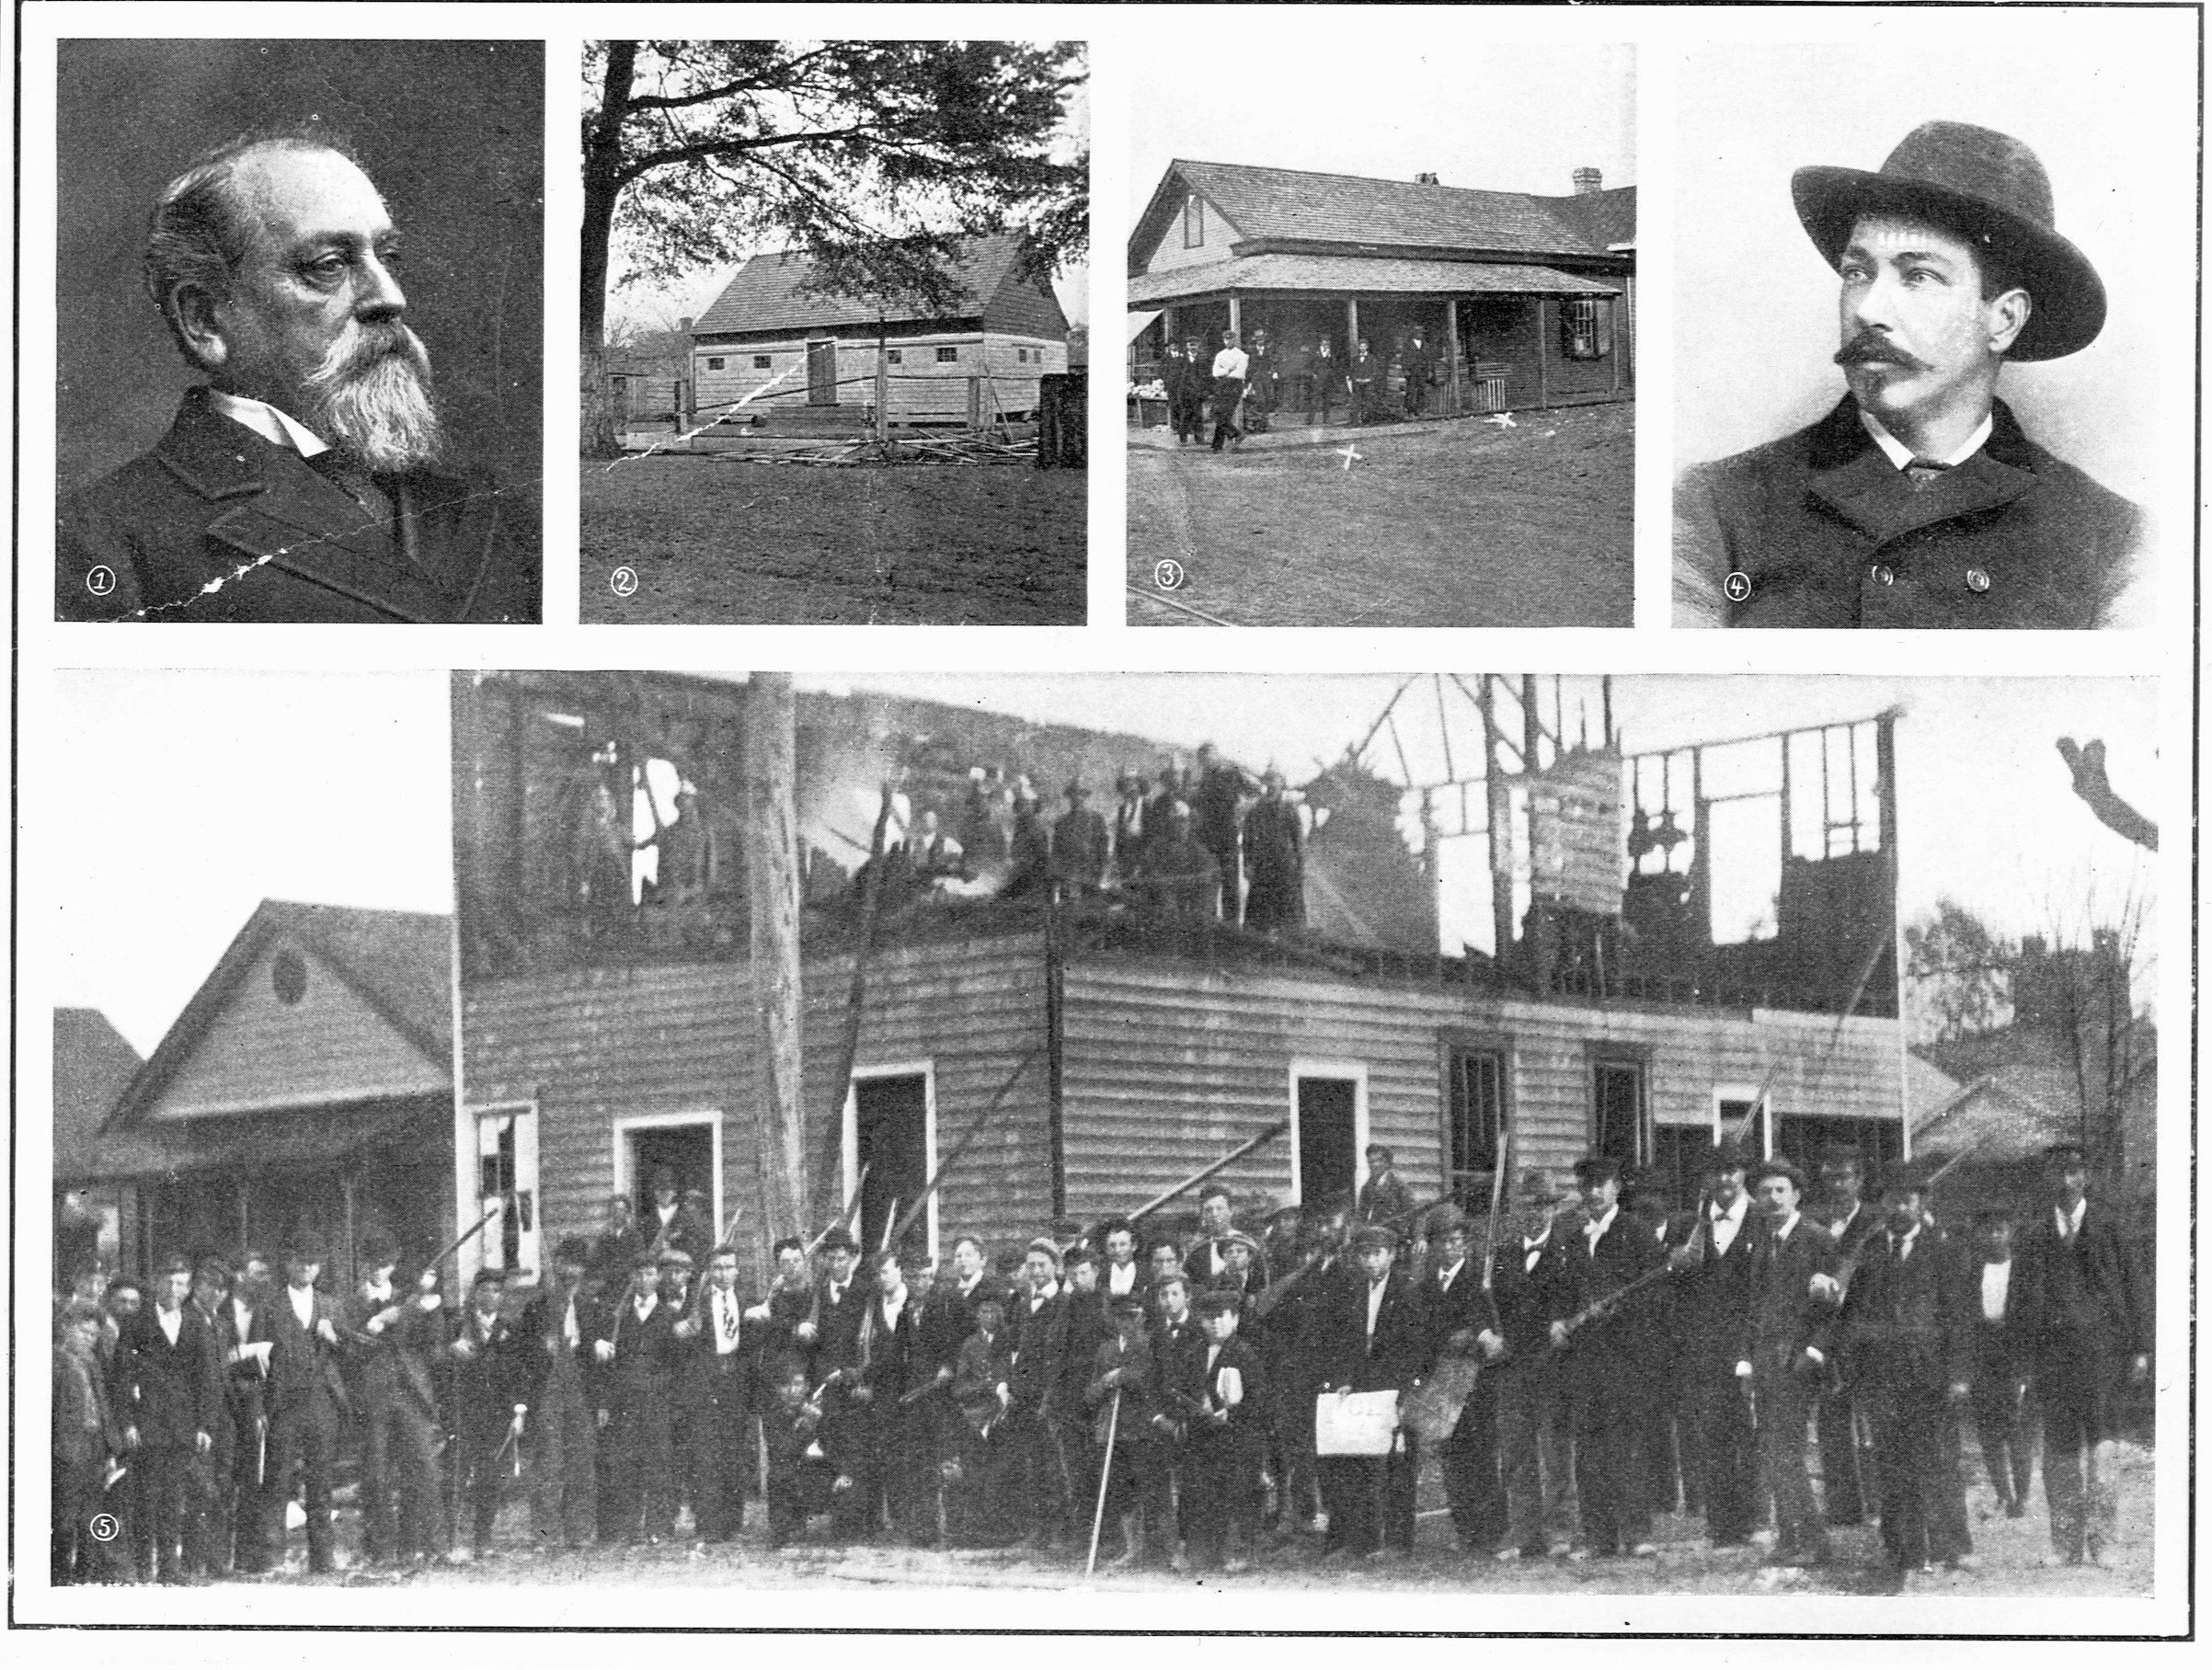 Coup in Wilmington, N.C., 1898: (1) Dr. S.P. Wright, the deposed mayor; (2) Armory, HQ of troops; (3) shanty where shooting took place; (4) Editor A.L. Manley, of the 